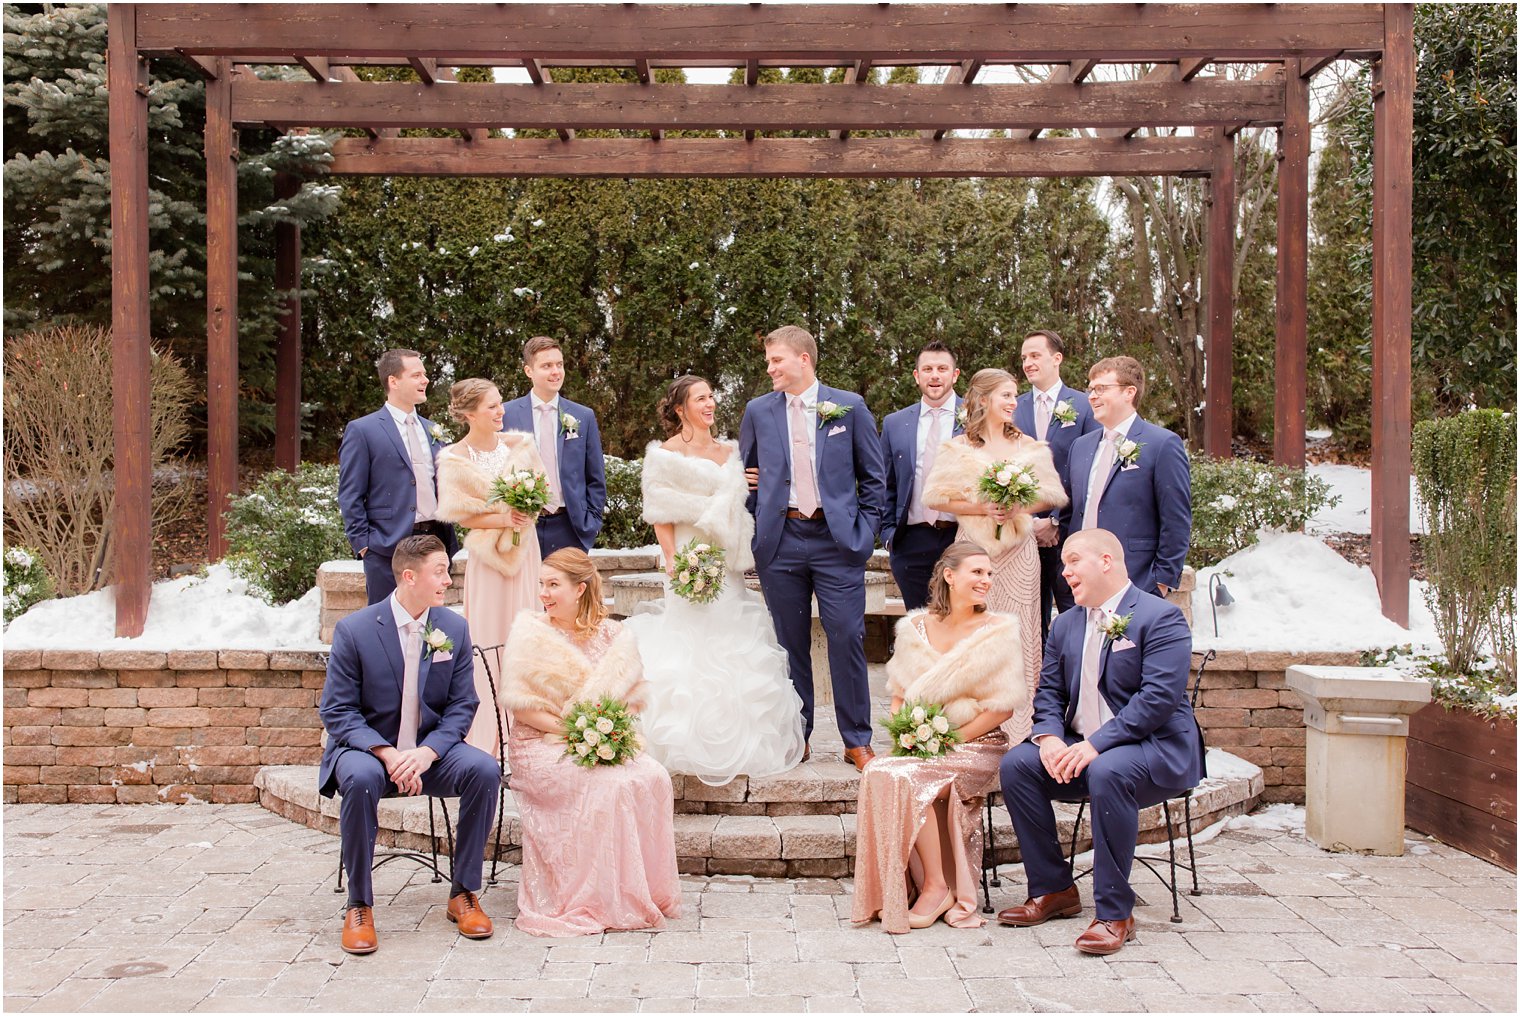 Rose gold and navy bridal party colors at Stone House at Stirling Ridge Wedding in Warren, NJ